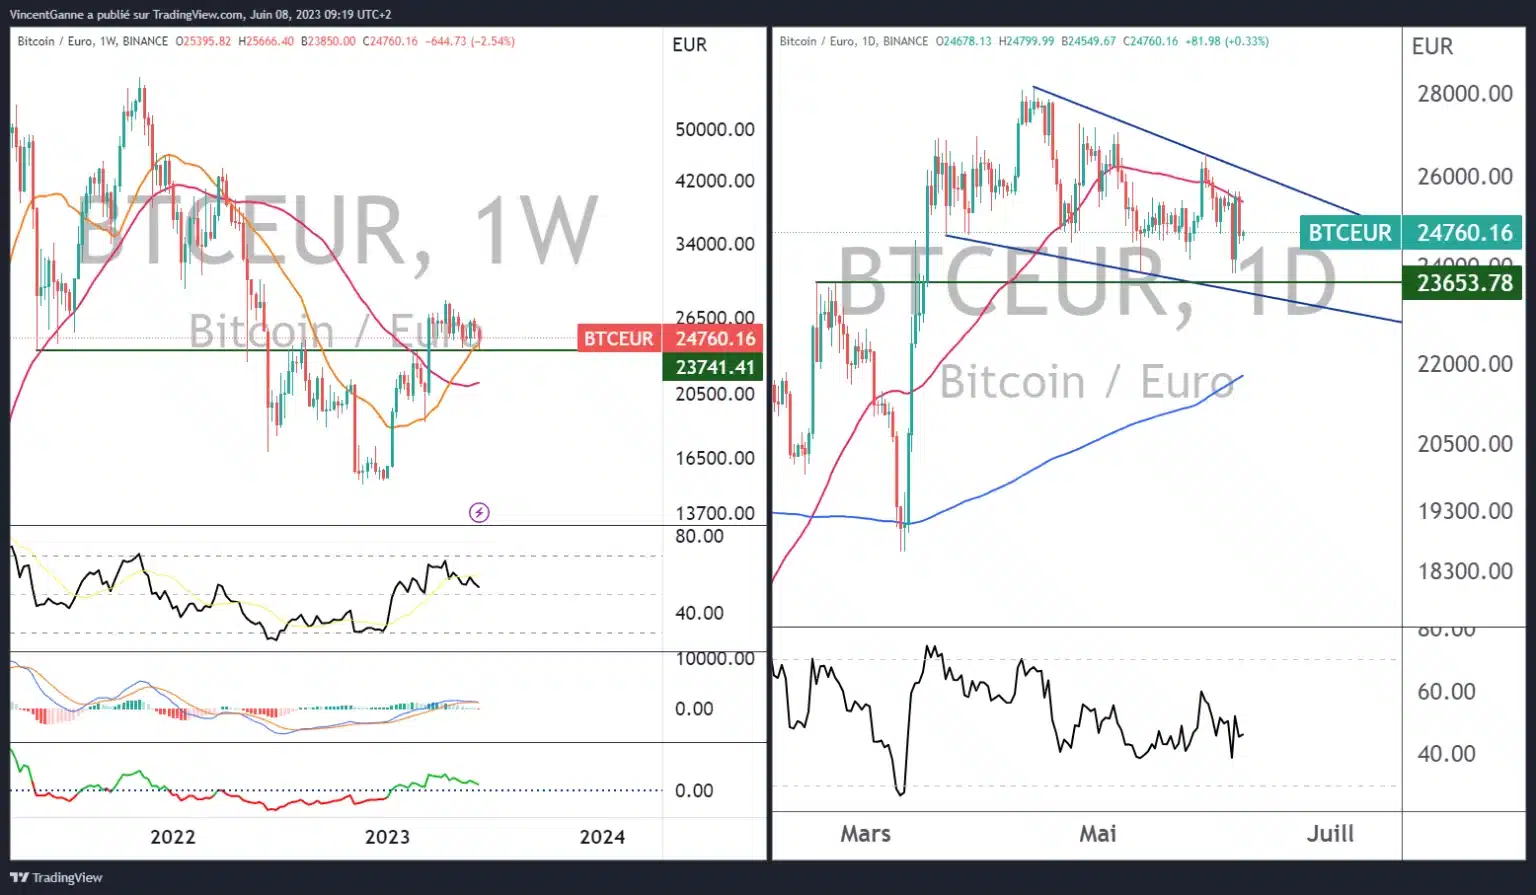 Graph produced with the TradingView website, which juxtaposes weekly and daily Japanese candlesticks for the BTC/EUR price